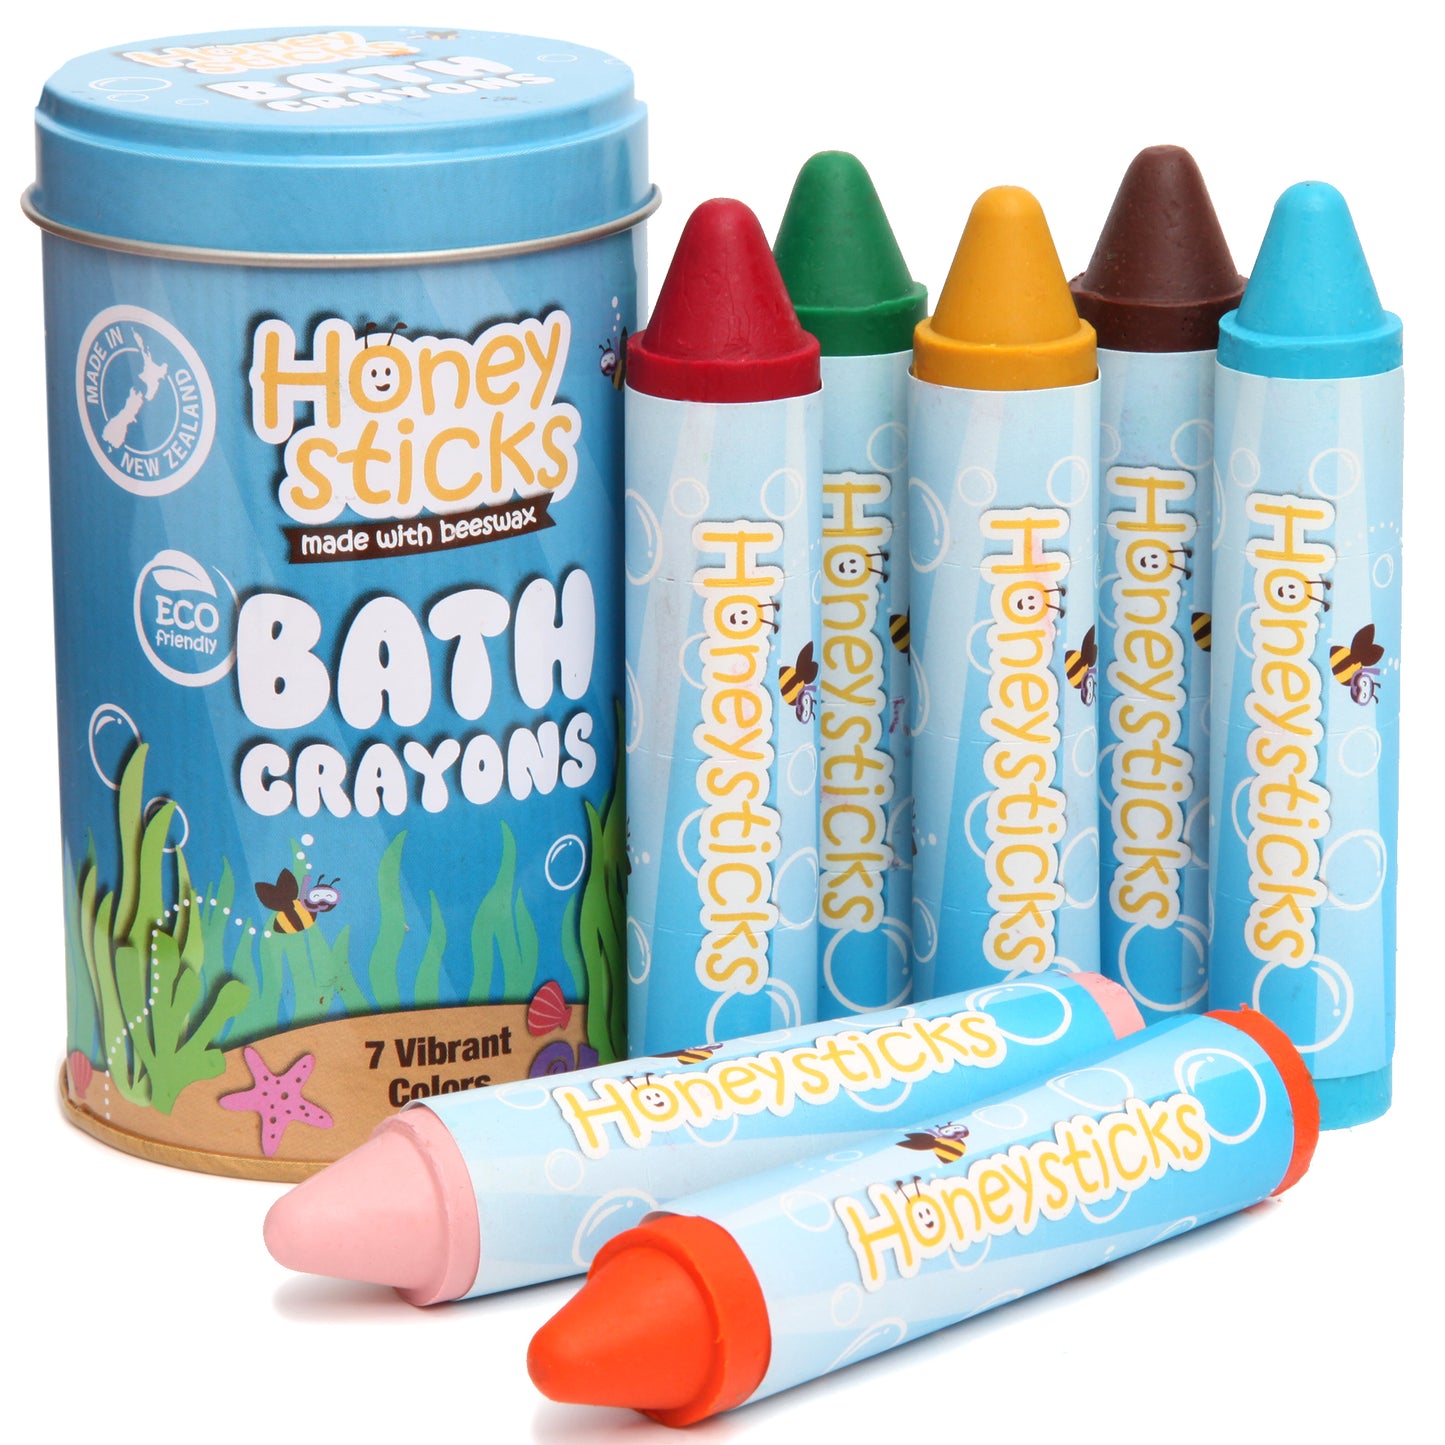 Natural Bath Crayons - Little Reef and Friends